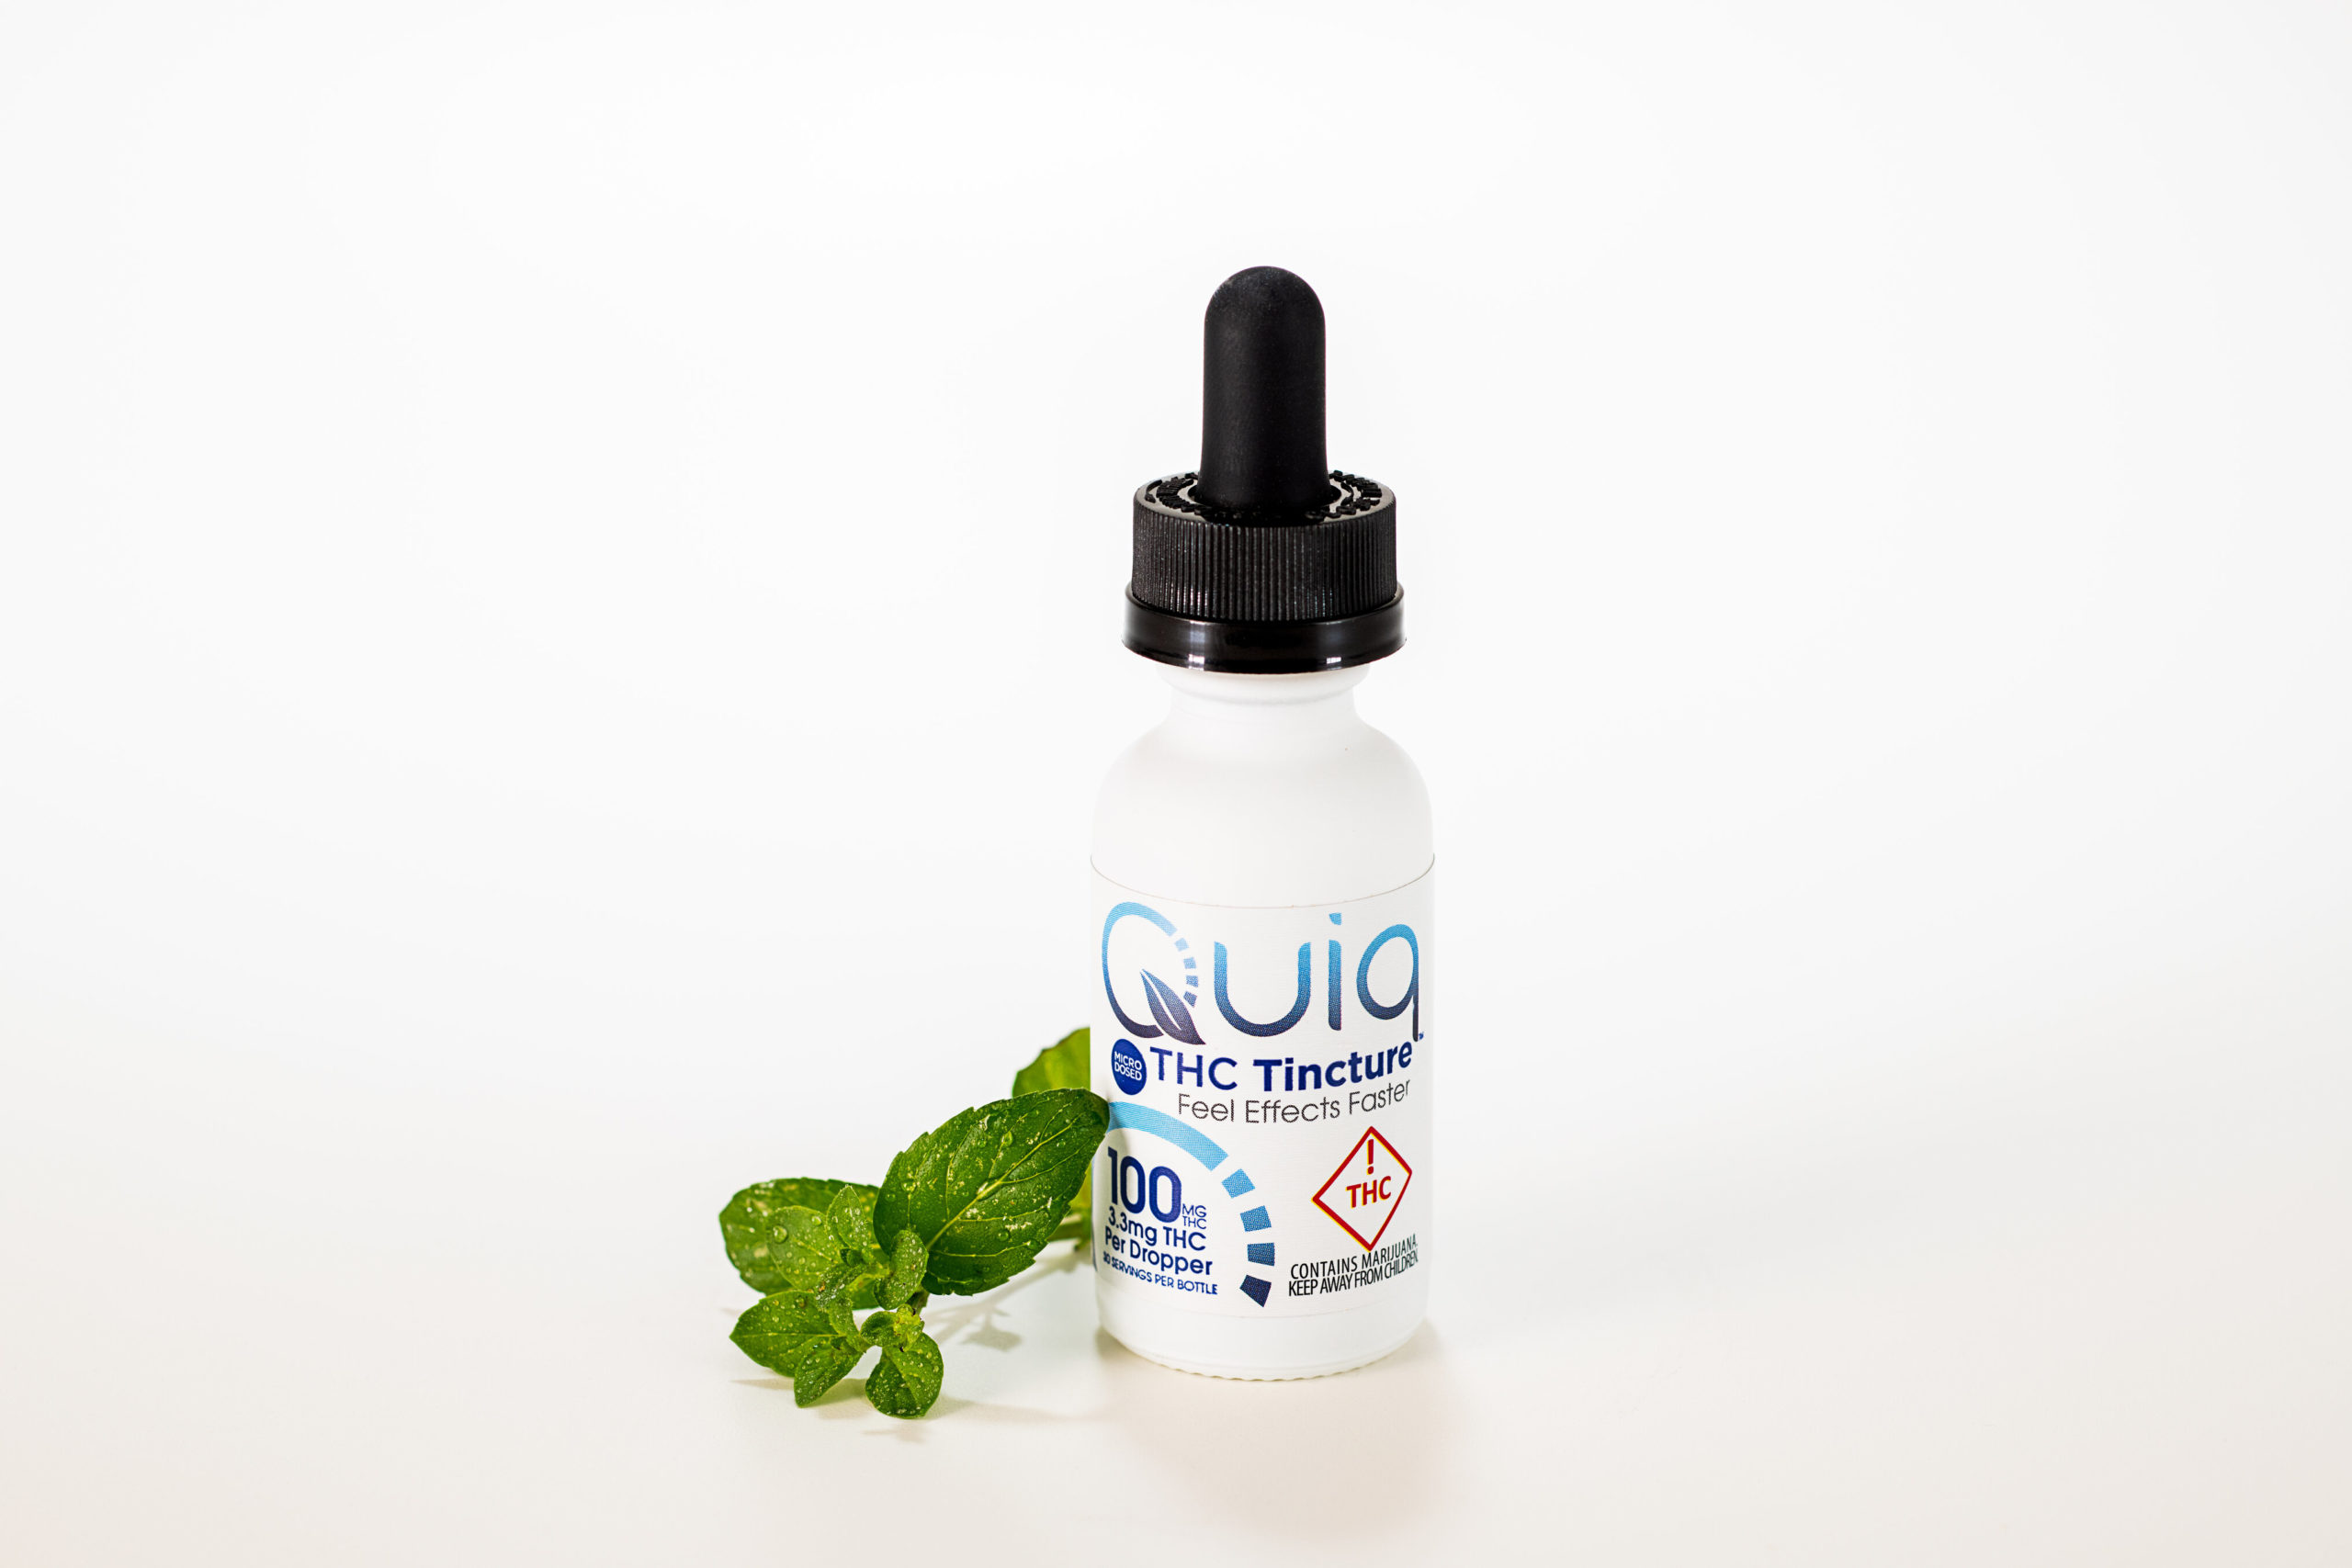 Quiq fast-acting THC-infused tincture, made by Medically Correct, is resting on a white surface with a small mint leaf to the side of the bottle.